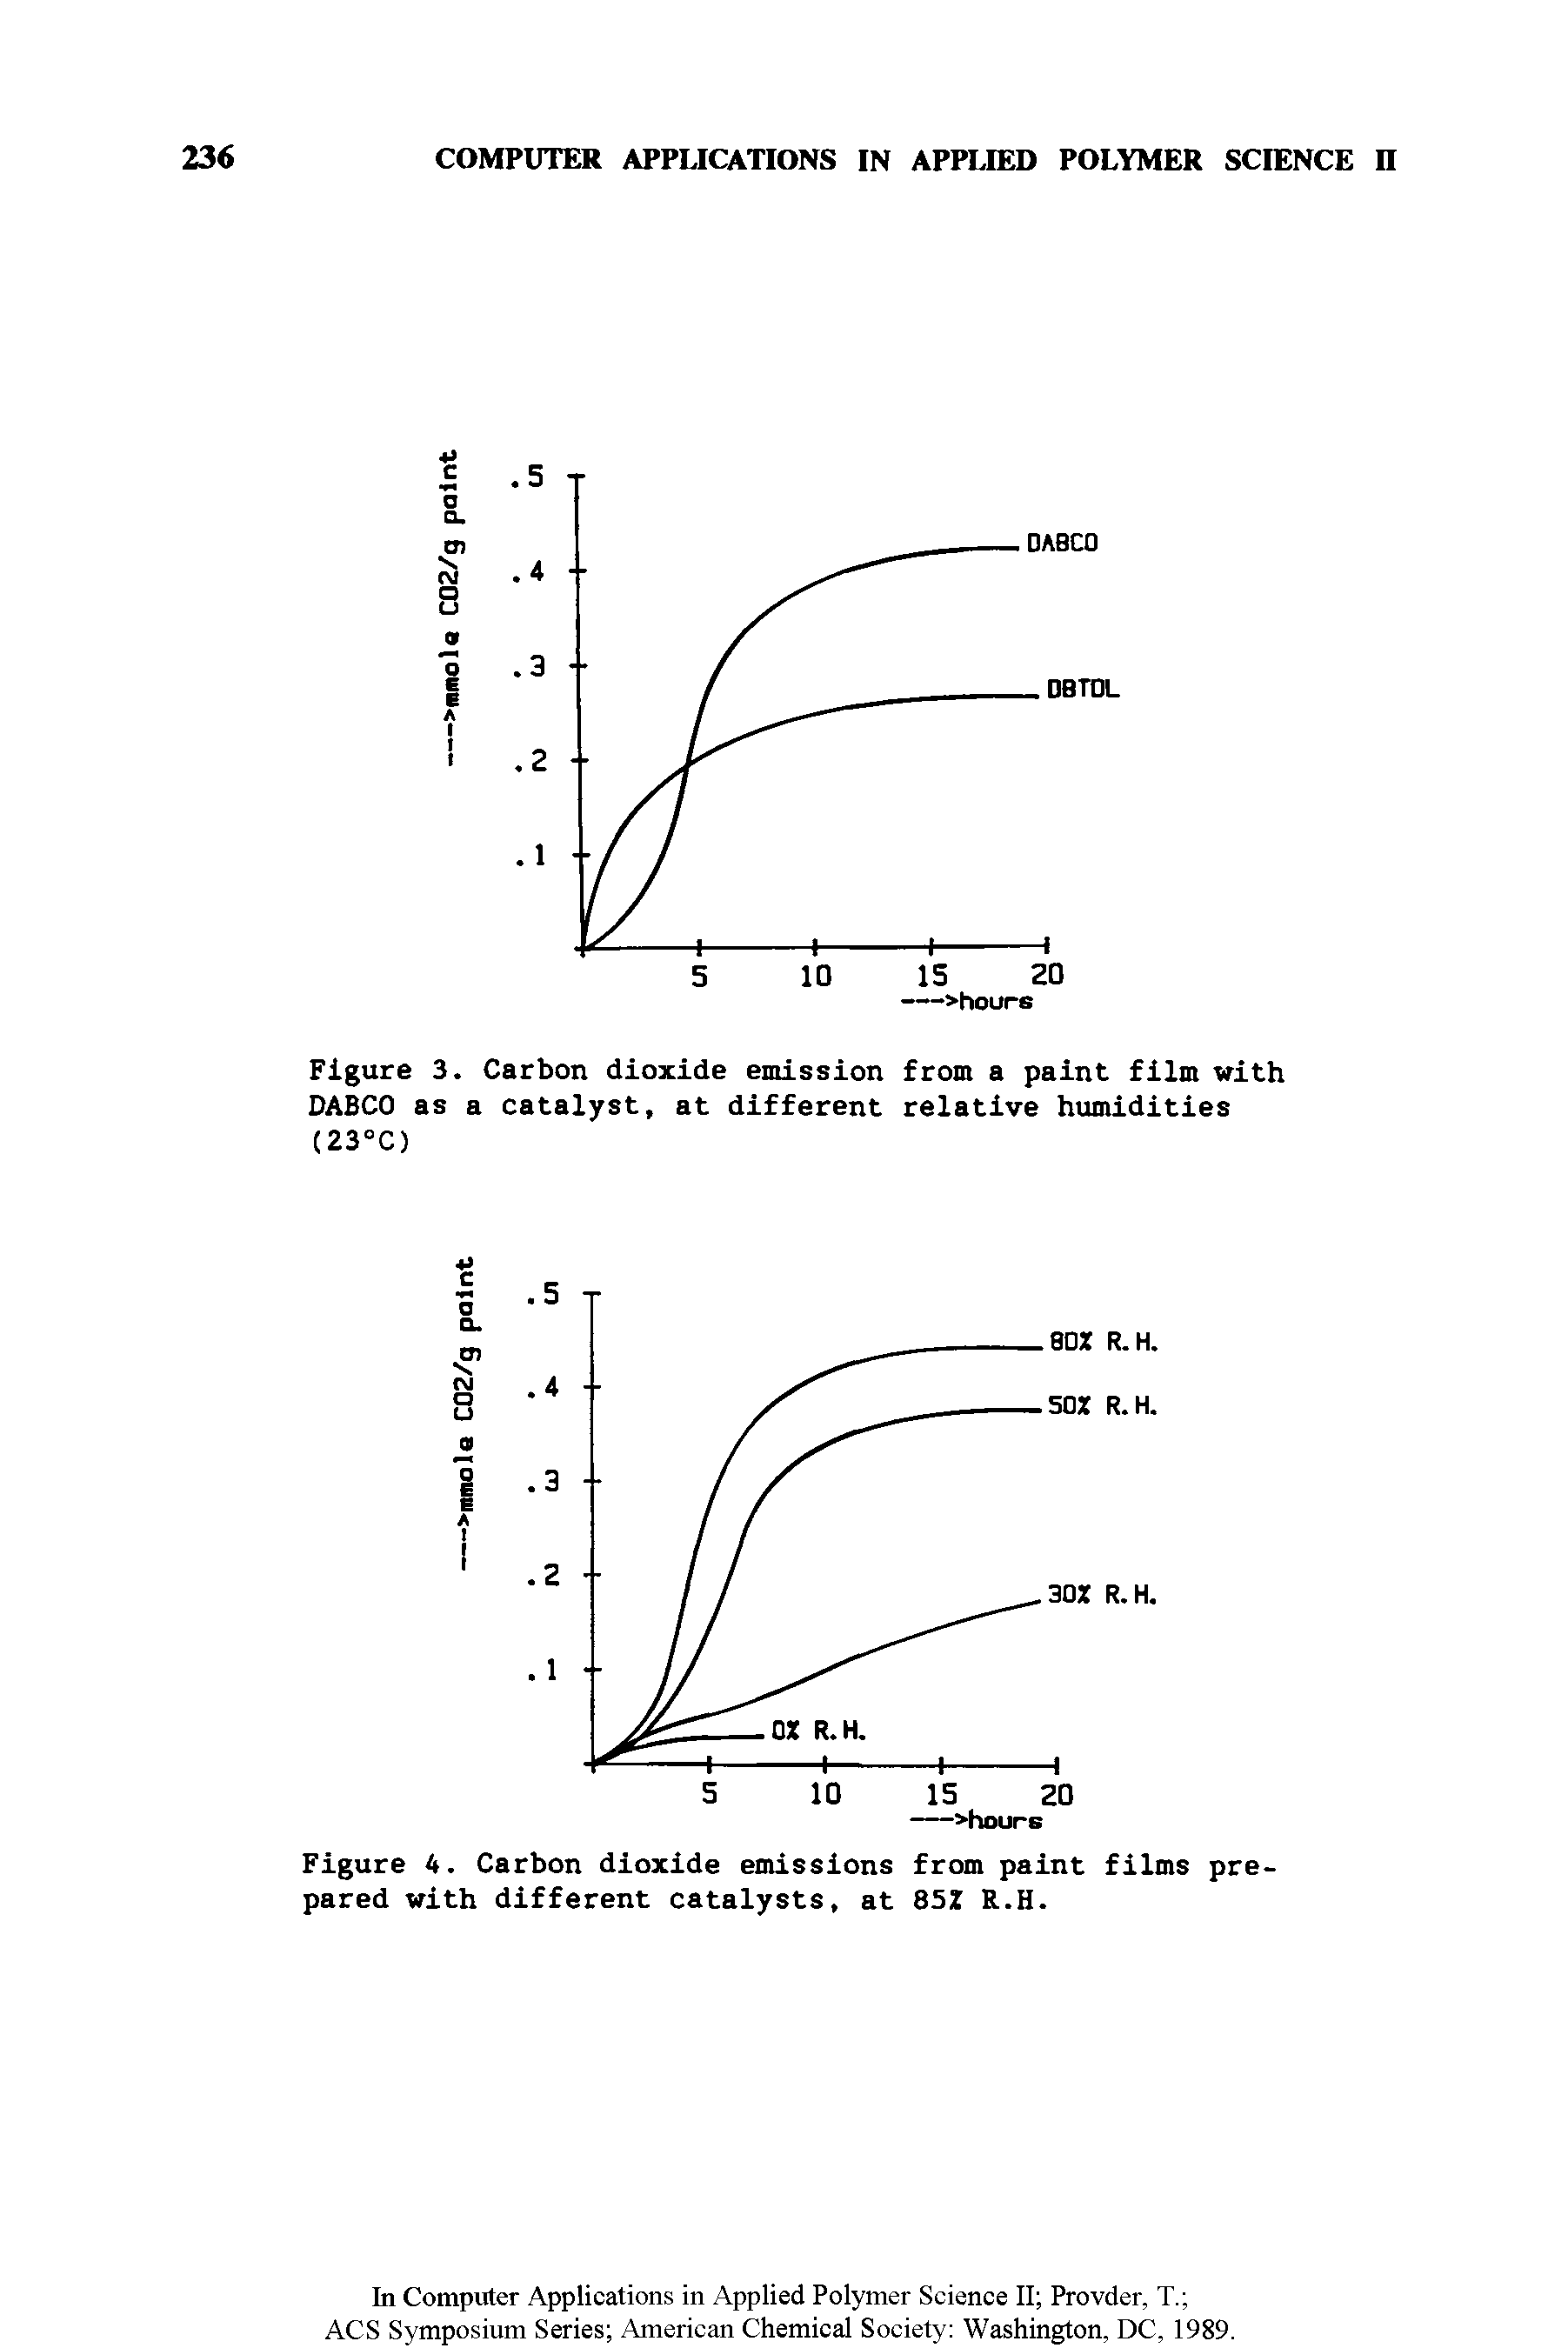 Figure 3. Carbon dioxide emission from a paint film with DABCO as a catalyst, at different relative humidities (23°C)...